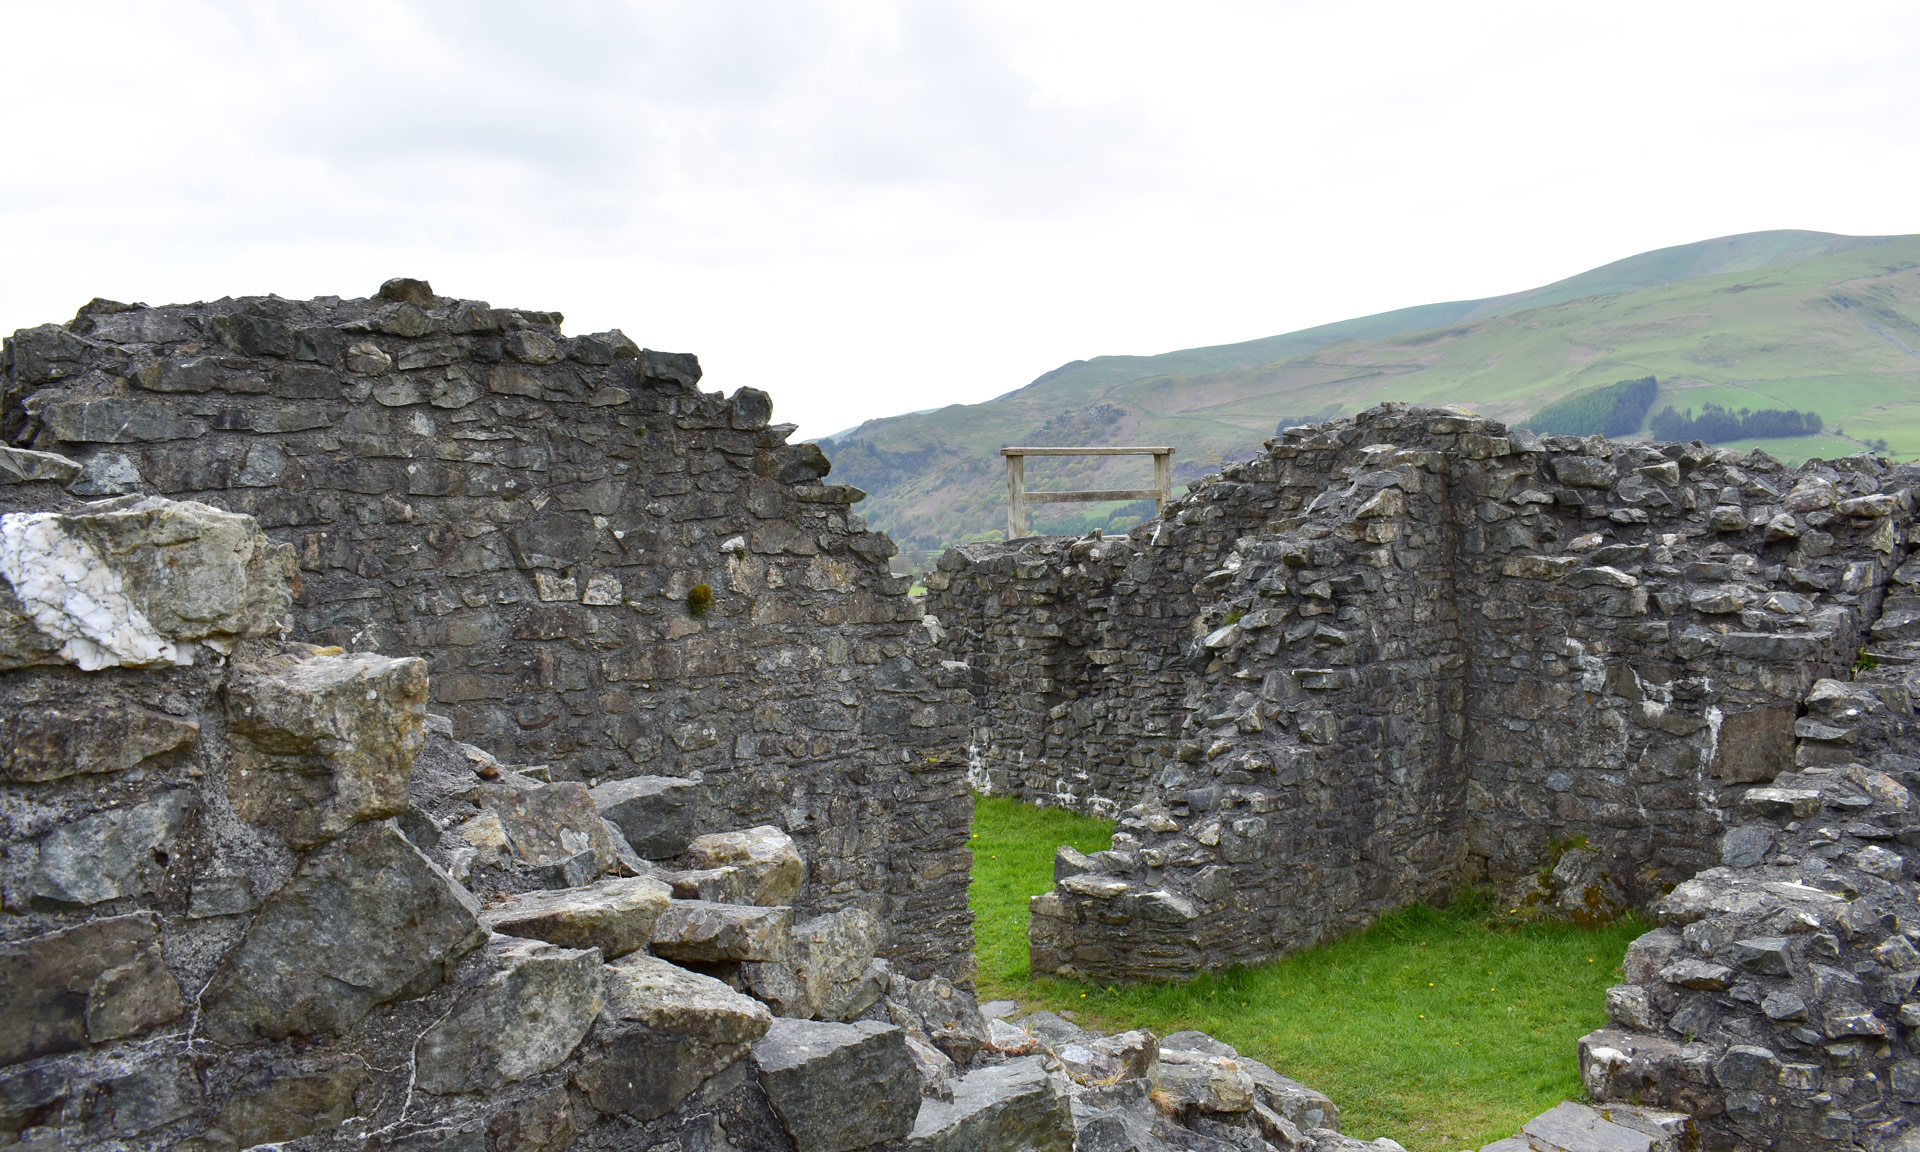 Ruined walls at Bere Castle